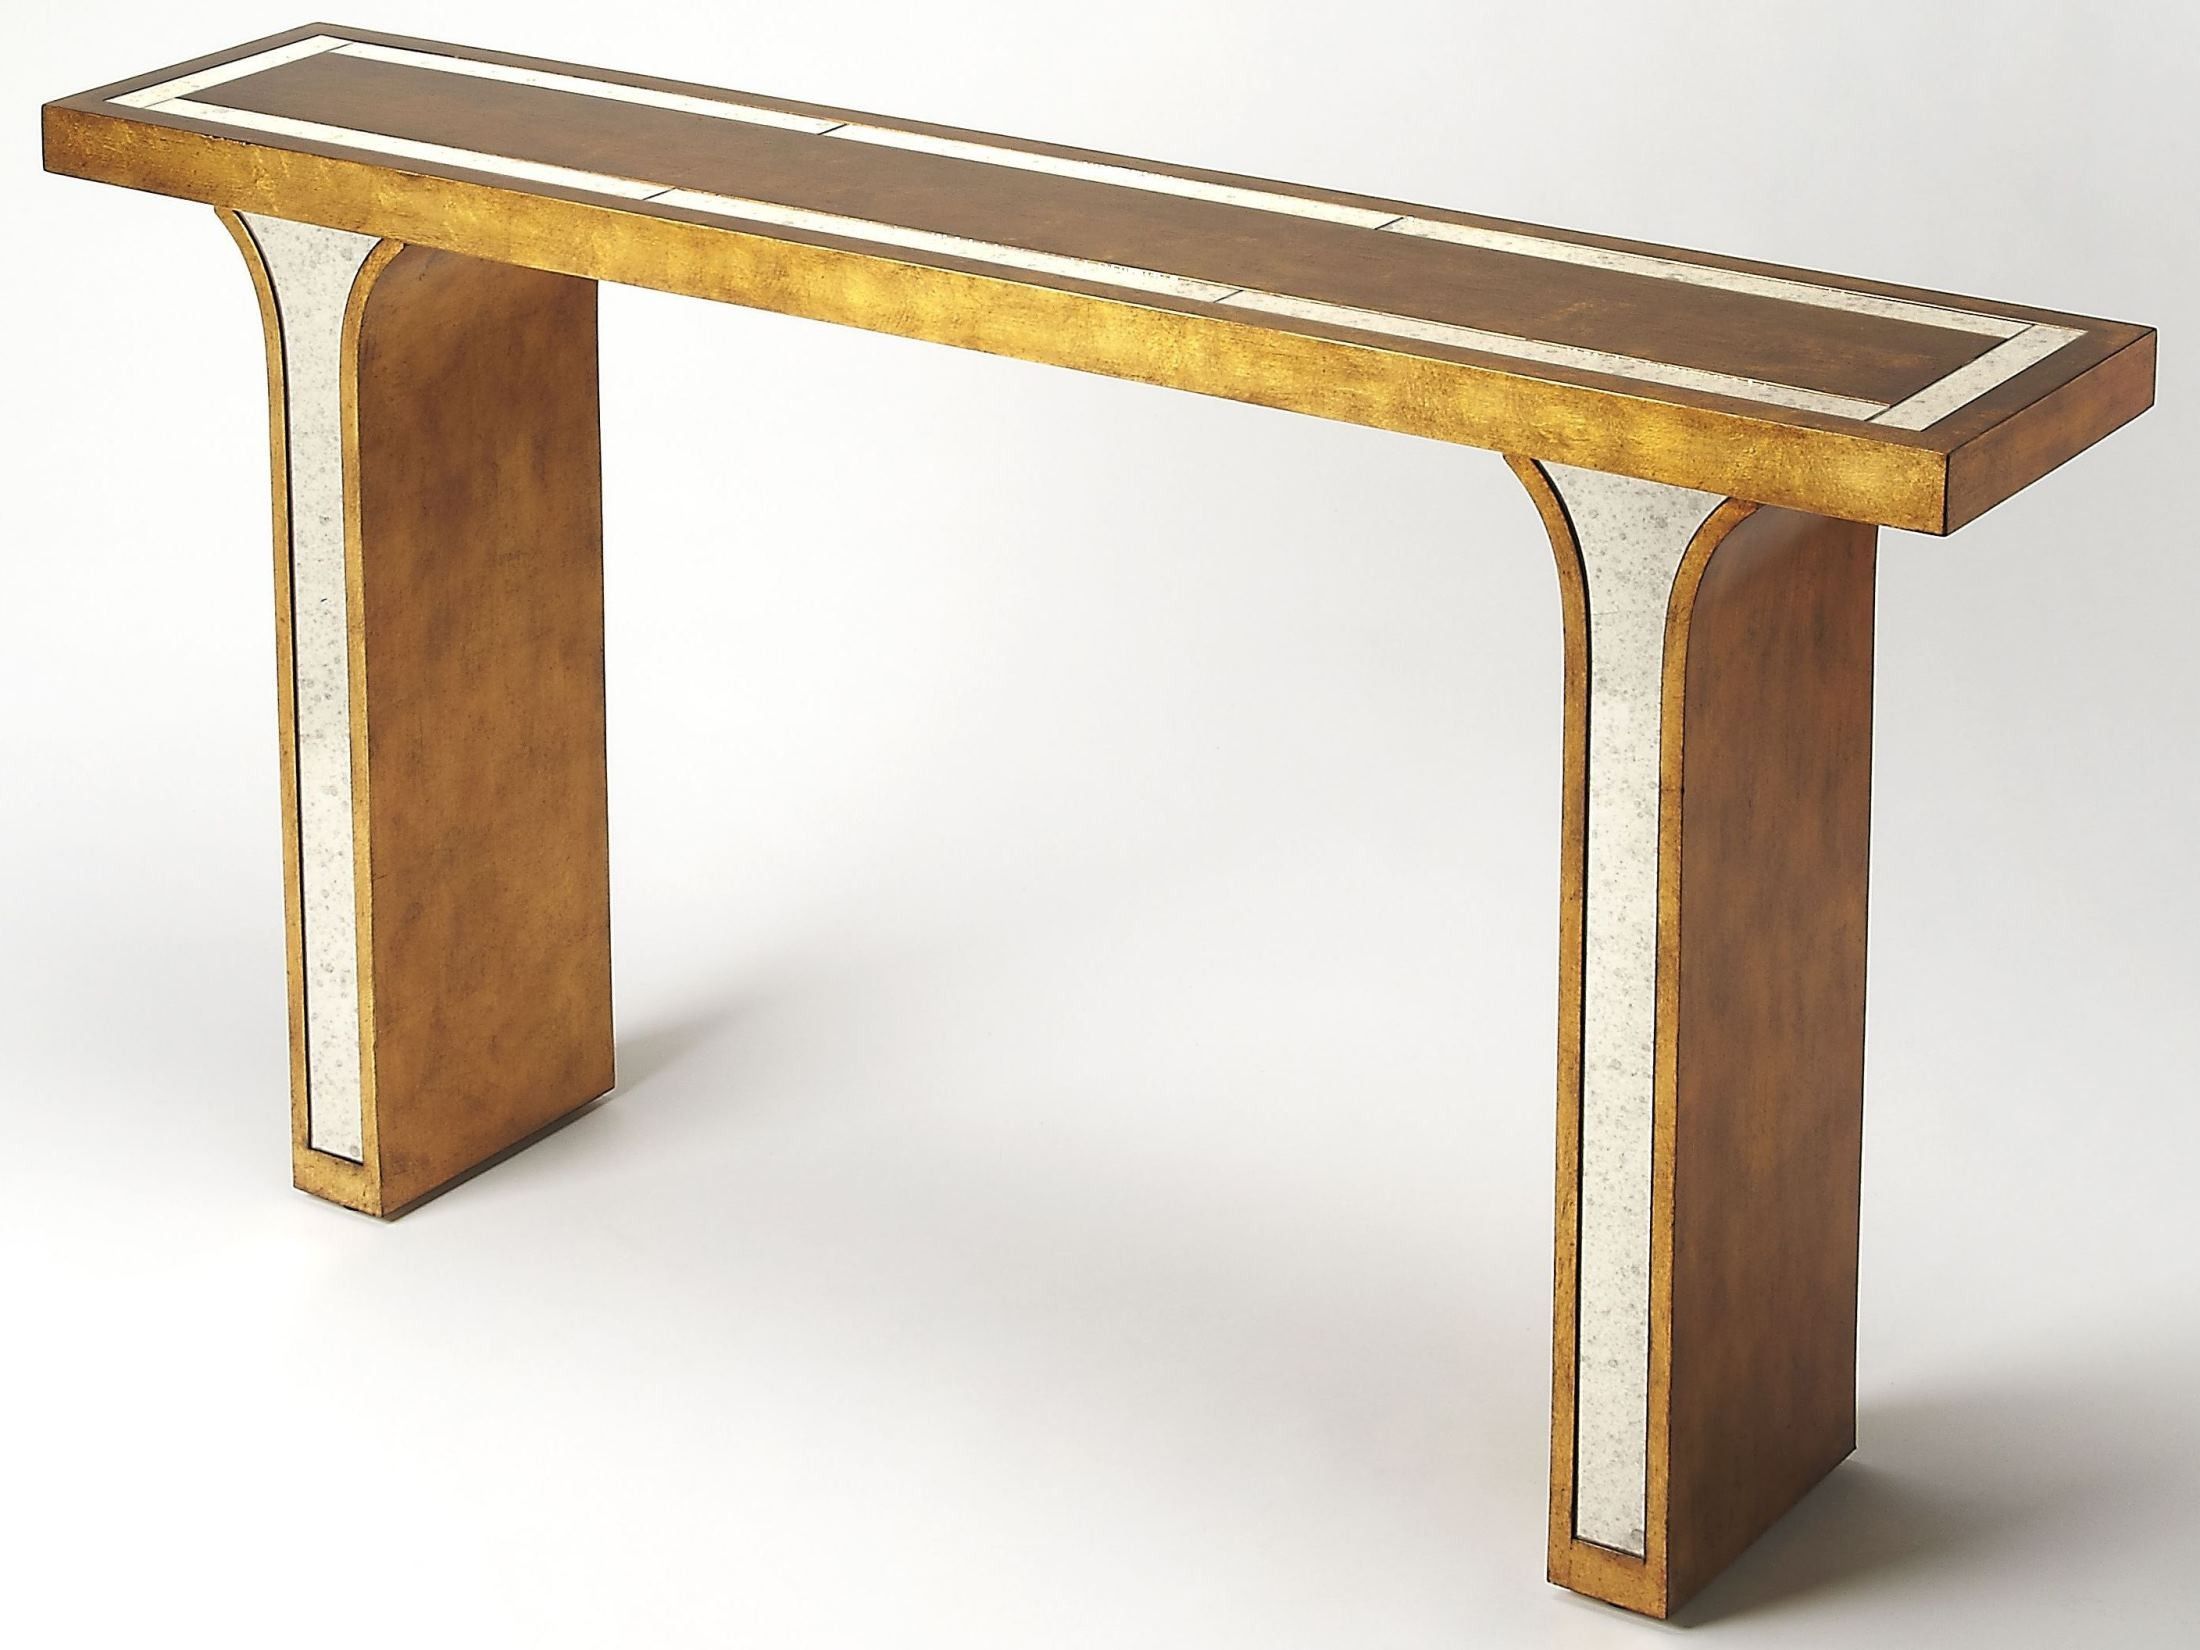 Katya Gold Leaf Console Table From Butler | Coleman Furniture With Regard To Metallic Gold Modern Console Tables (View 20 of 20)